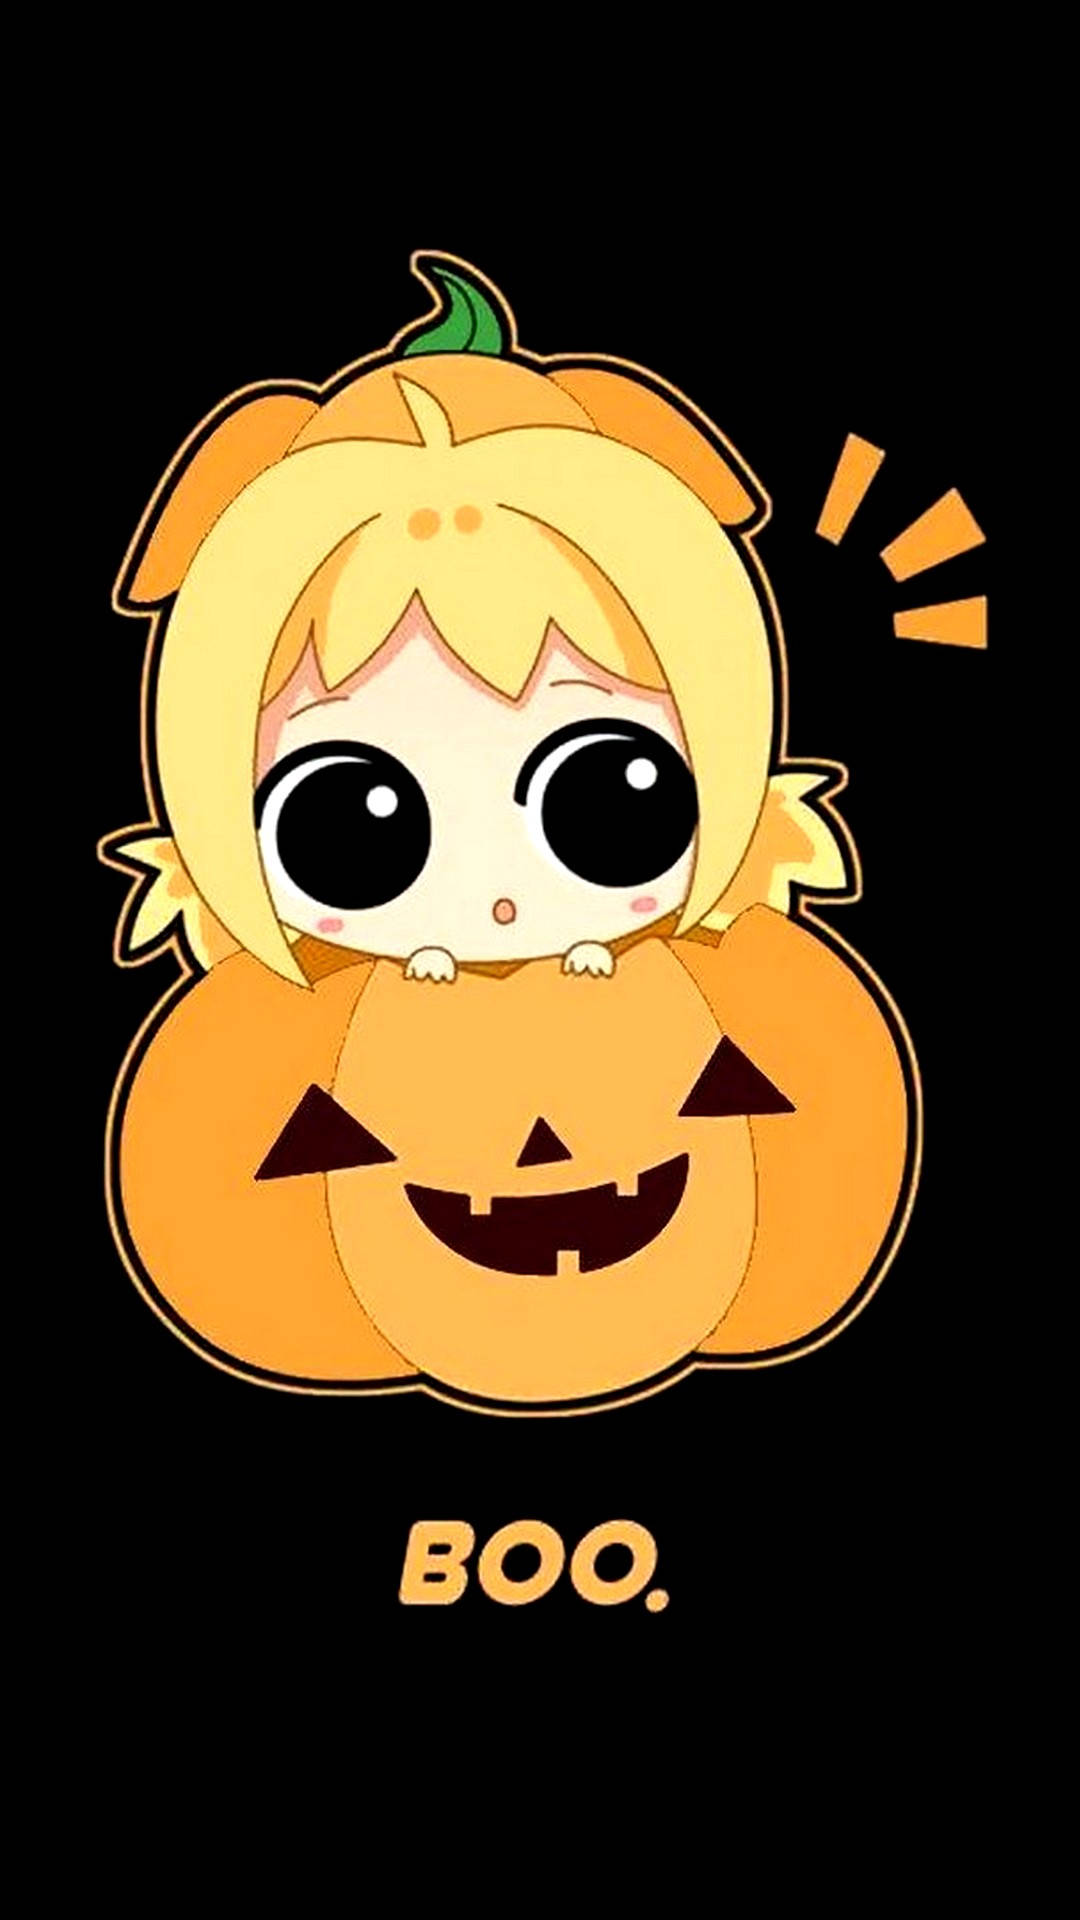 "Make your Halloween sweet with a cute phone!" Wallpaper